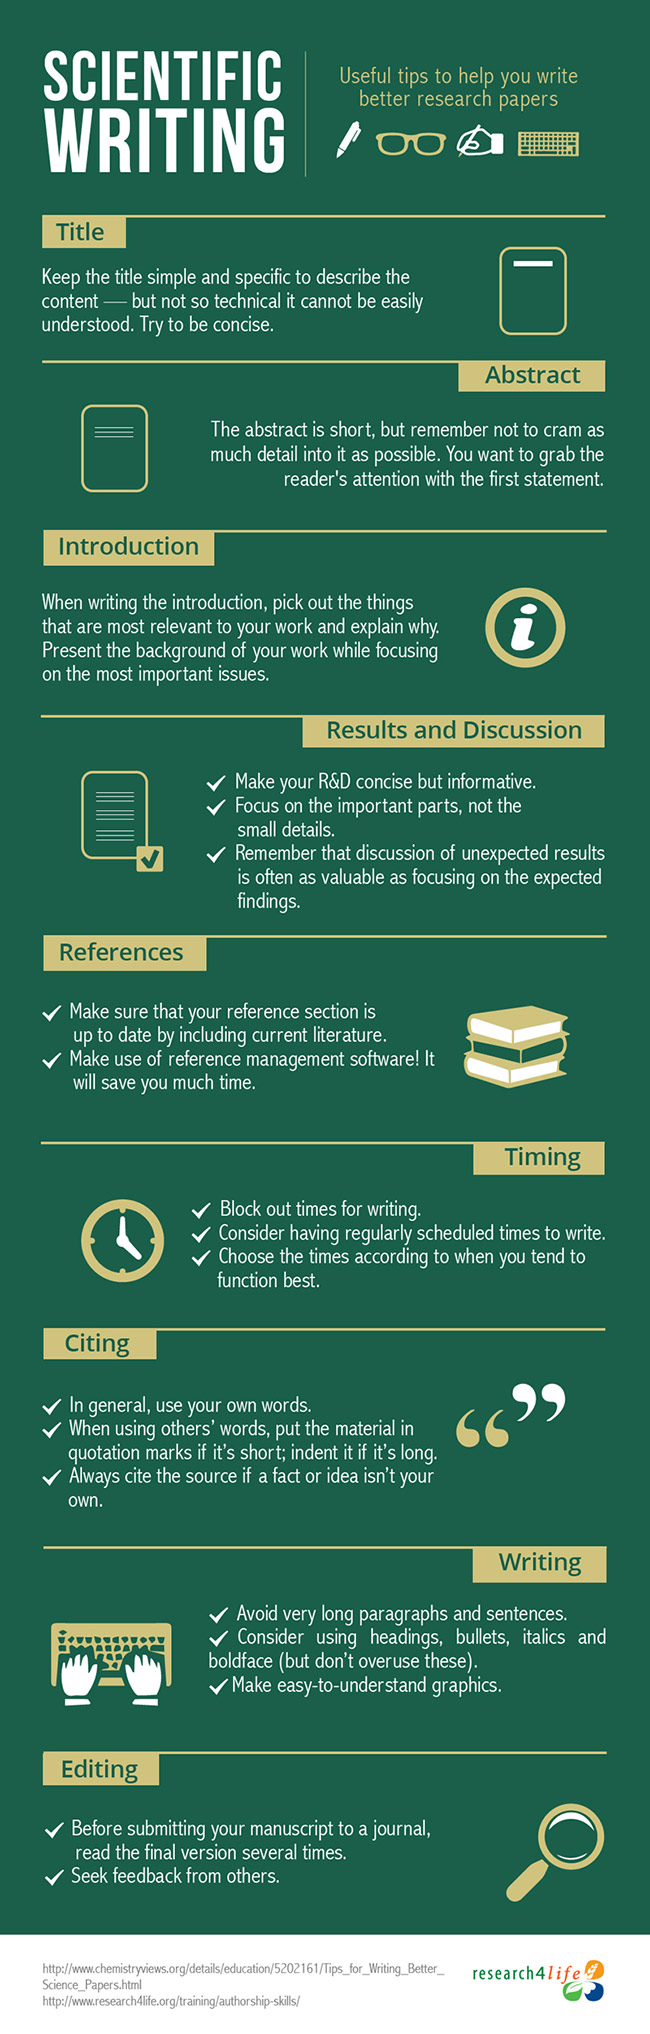 Tips for Writing Research Articles